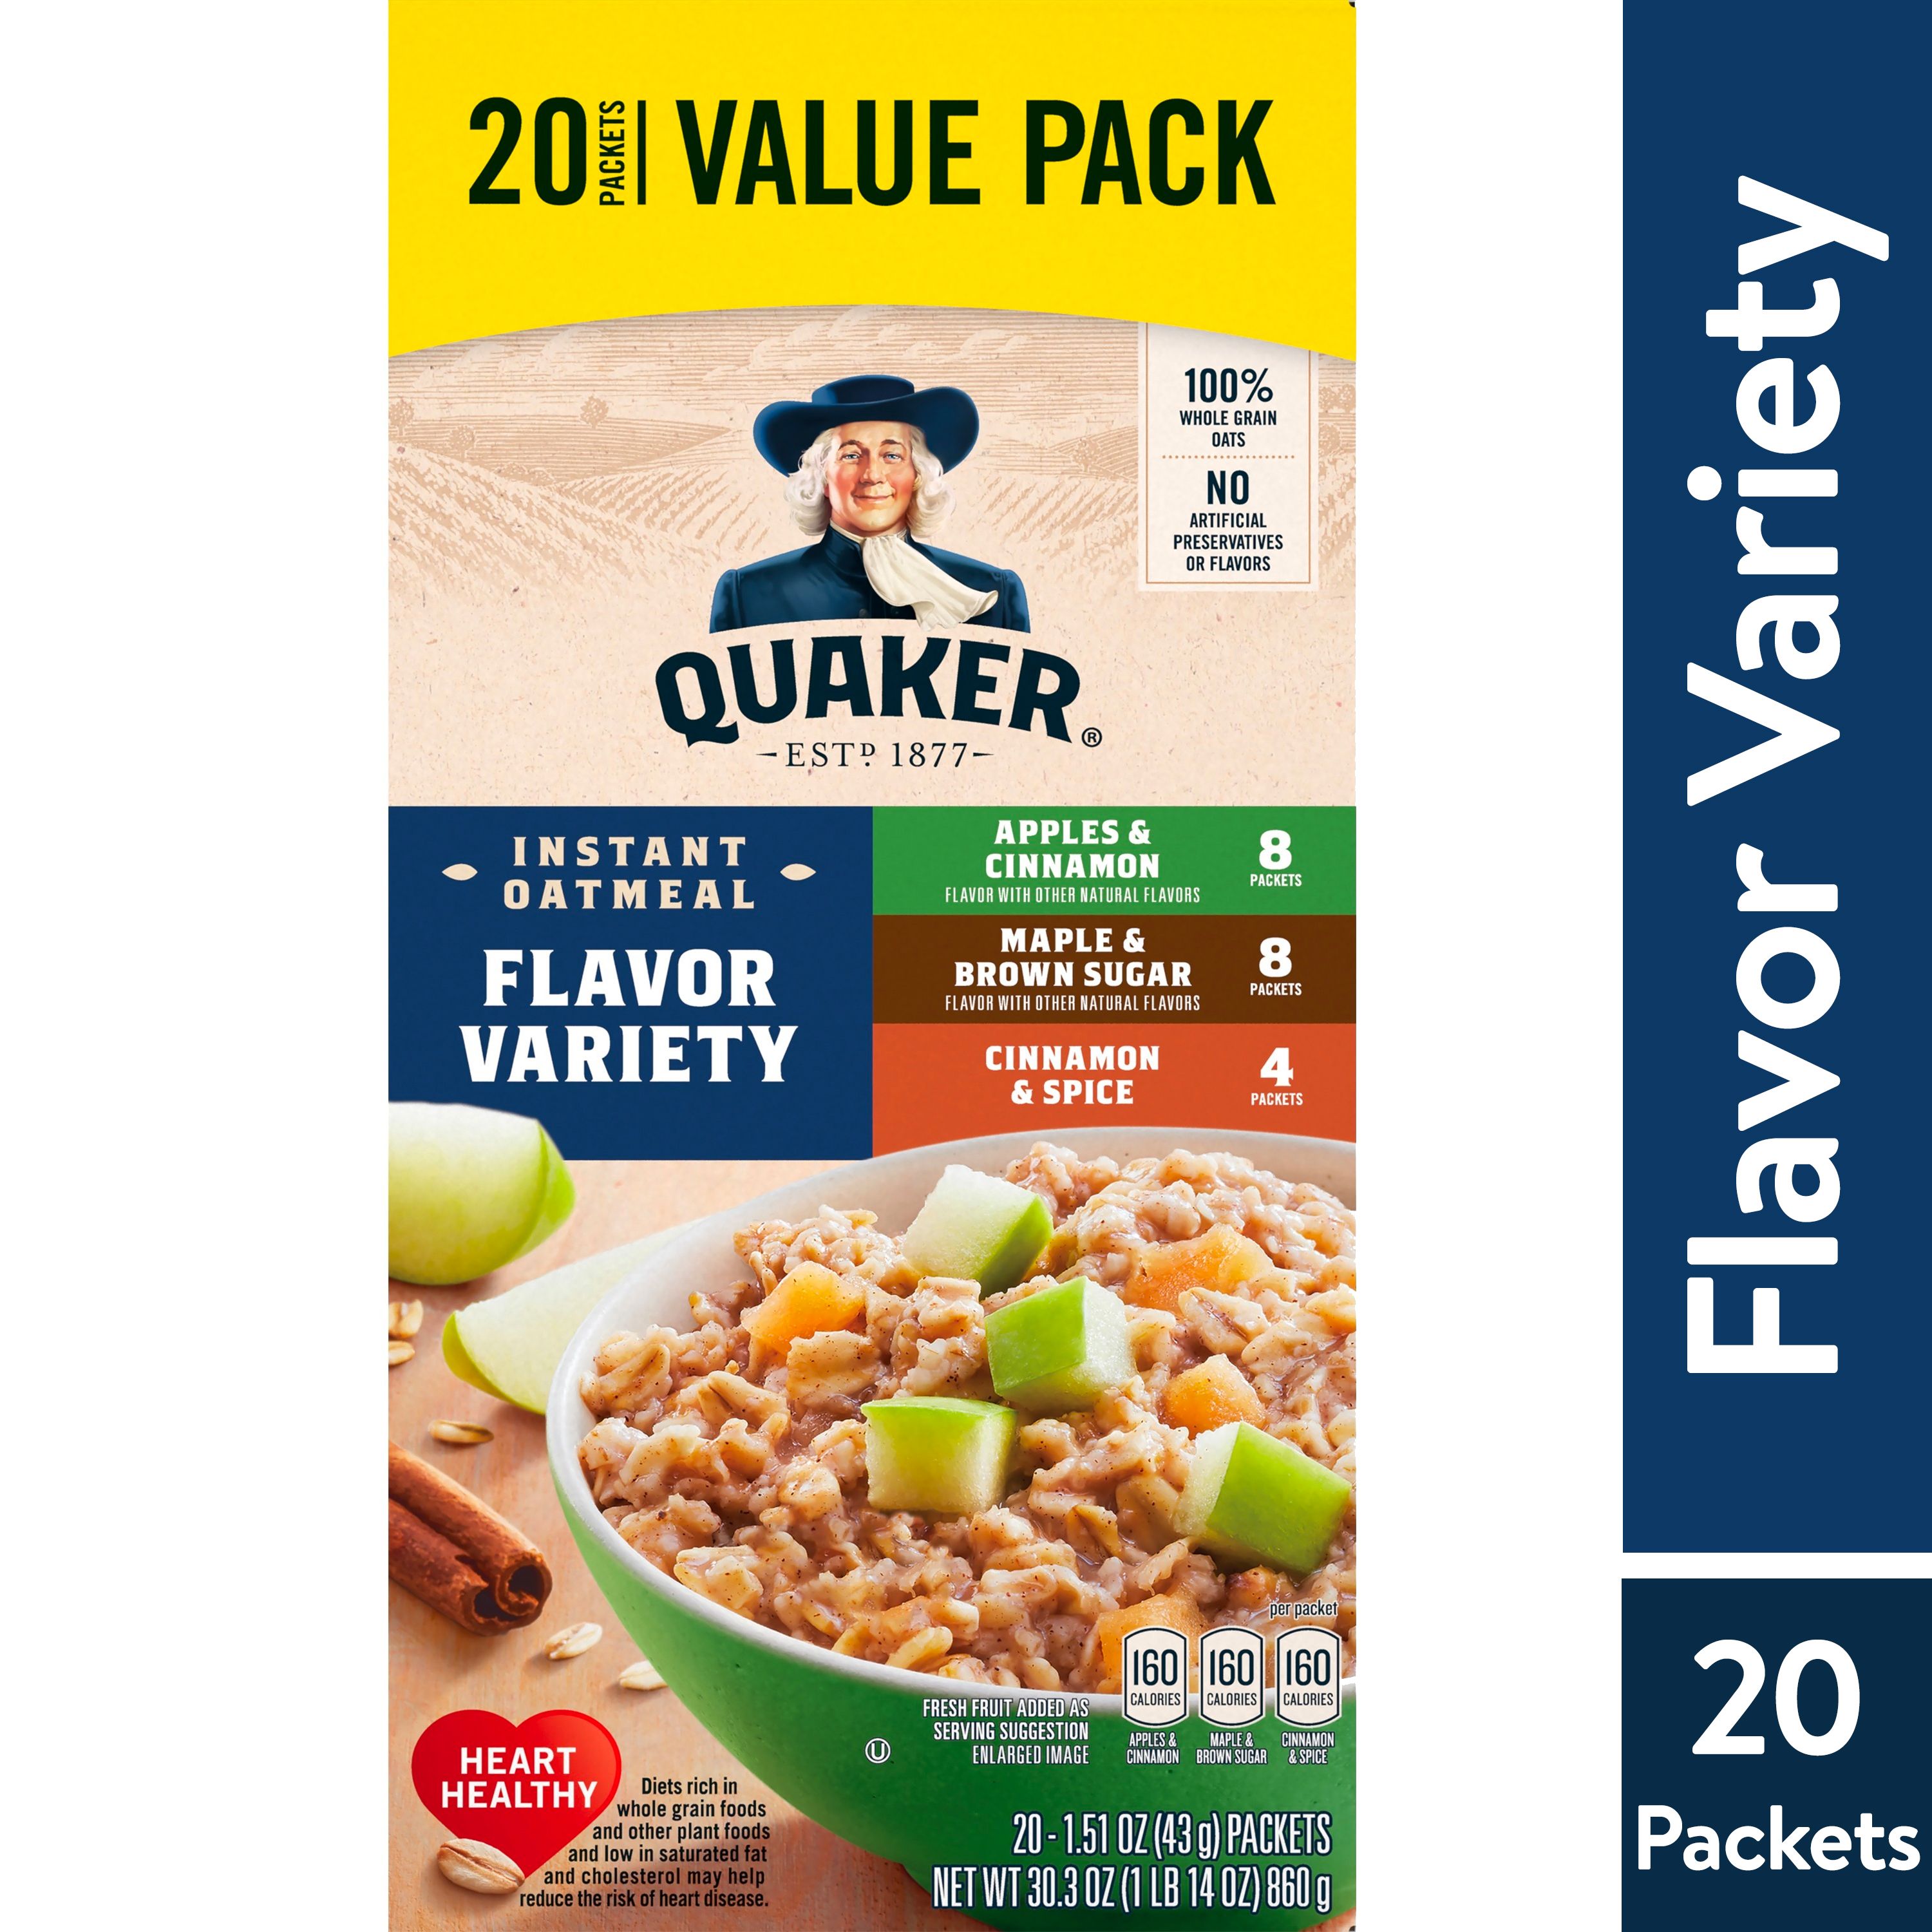 Quaker, Instant Oatmeal, Variety Value Pack, 1.51 oz, 20 Packets - image 1 of 12